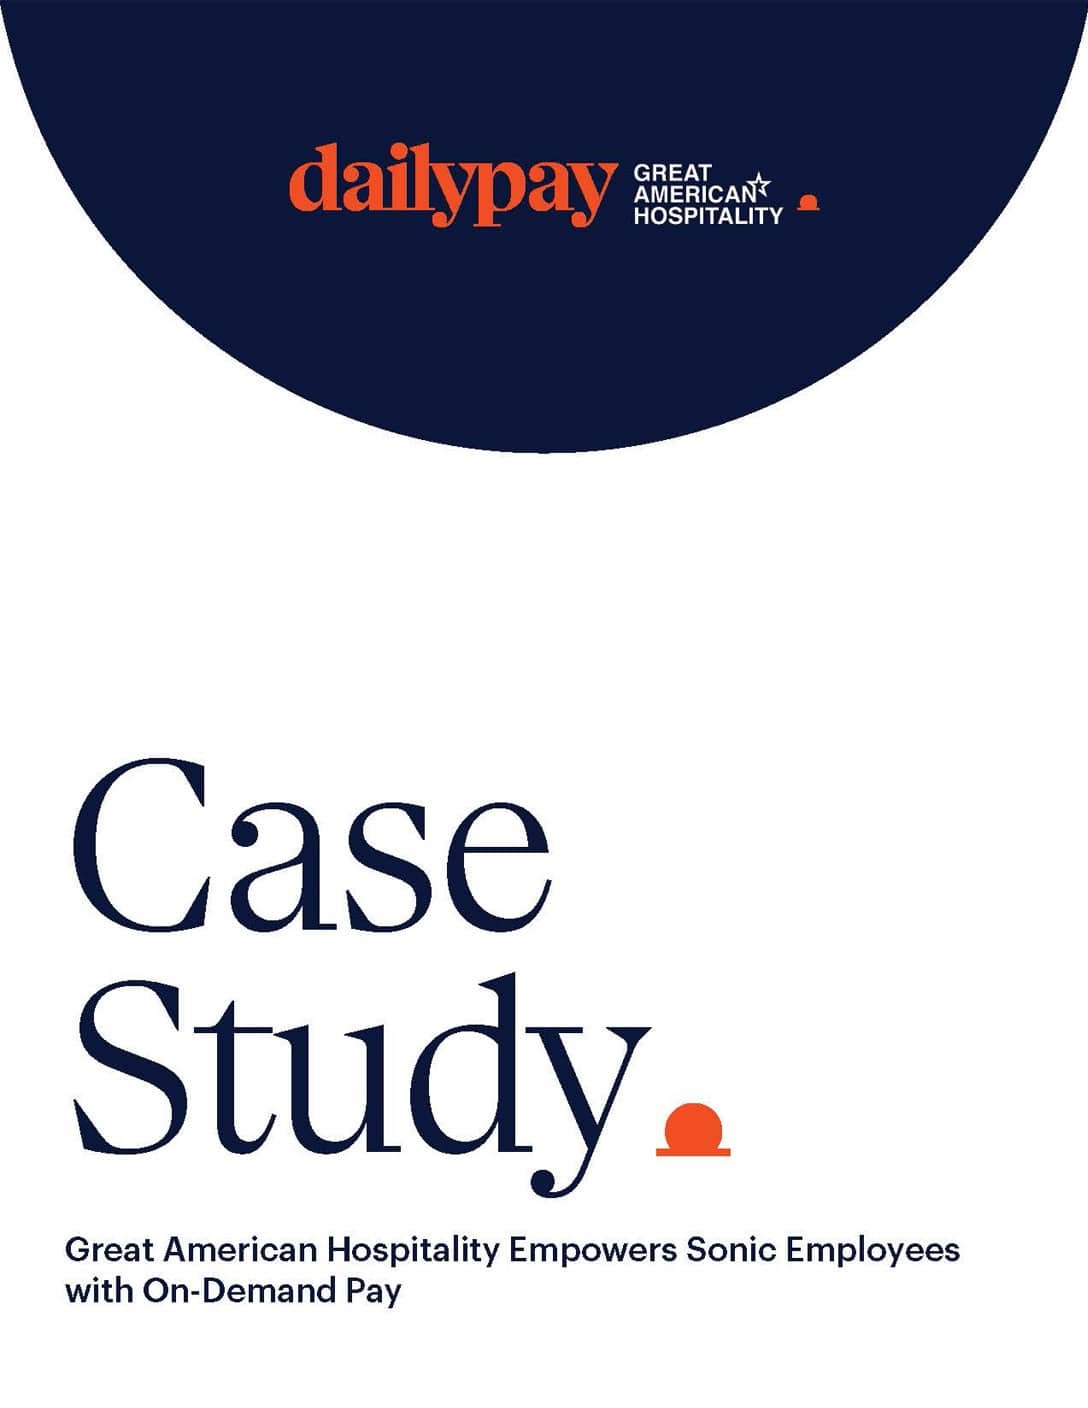 An image showing the front page of a case study by DailyPay and Great American Hospitality. It is titled "Case Study: Great American Hospitality Empowers Sonic Employees with On-Demand Pay." The DailyPay and Great American Hospitality logos are displayed at the top.